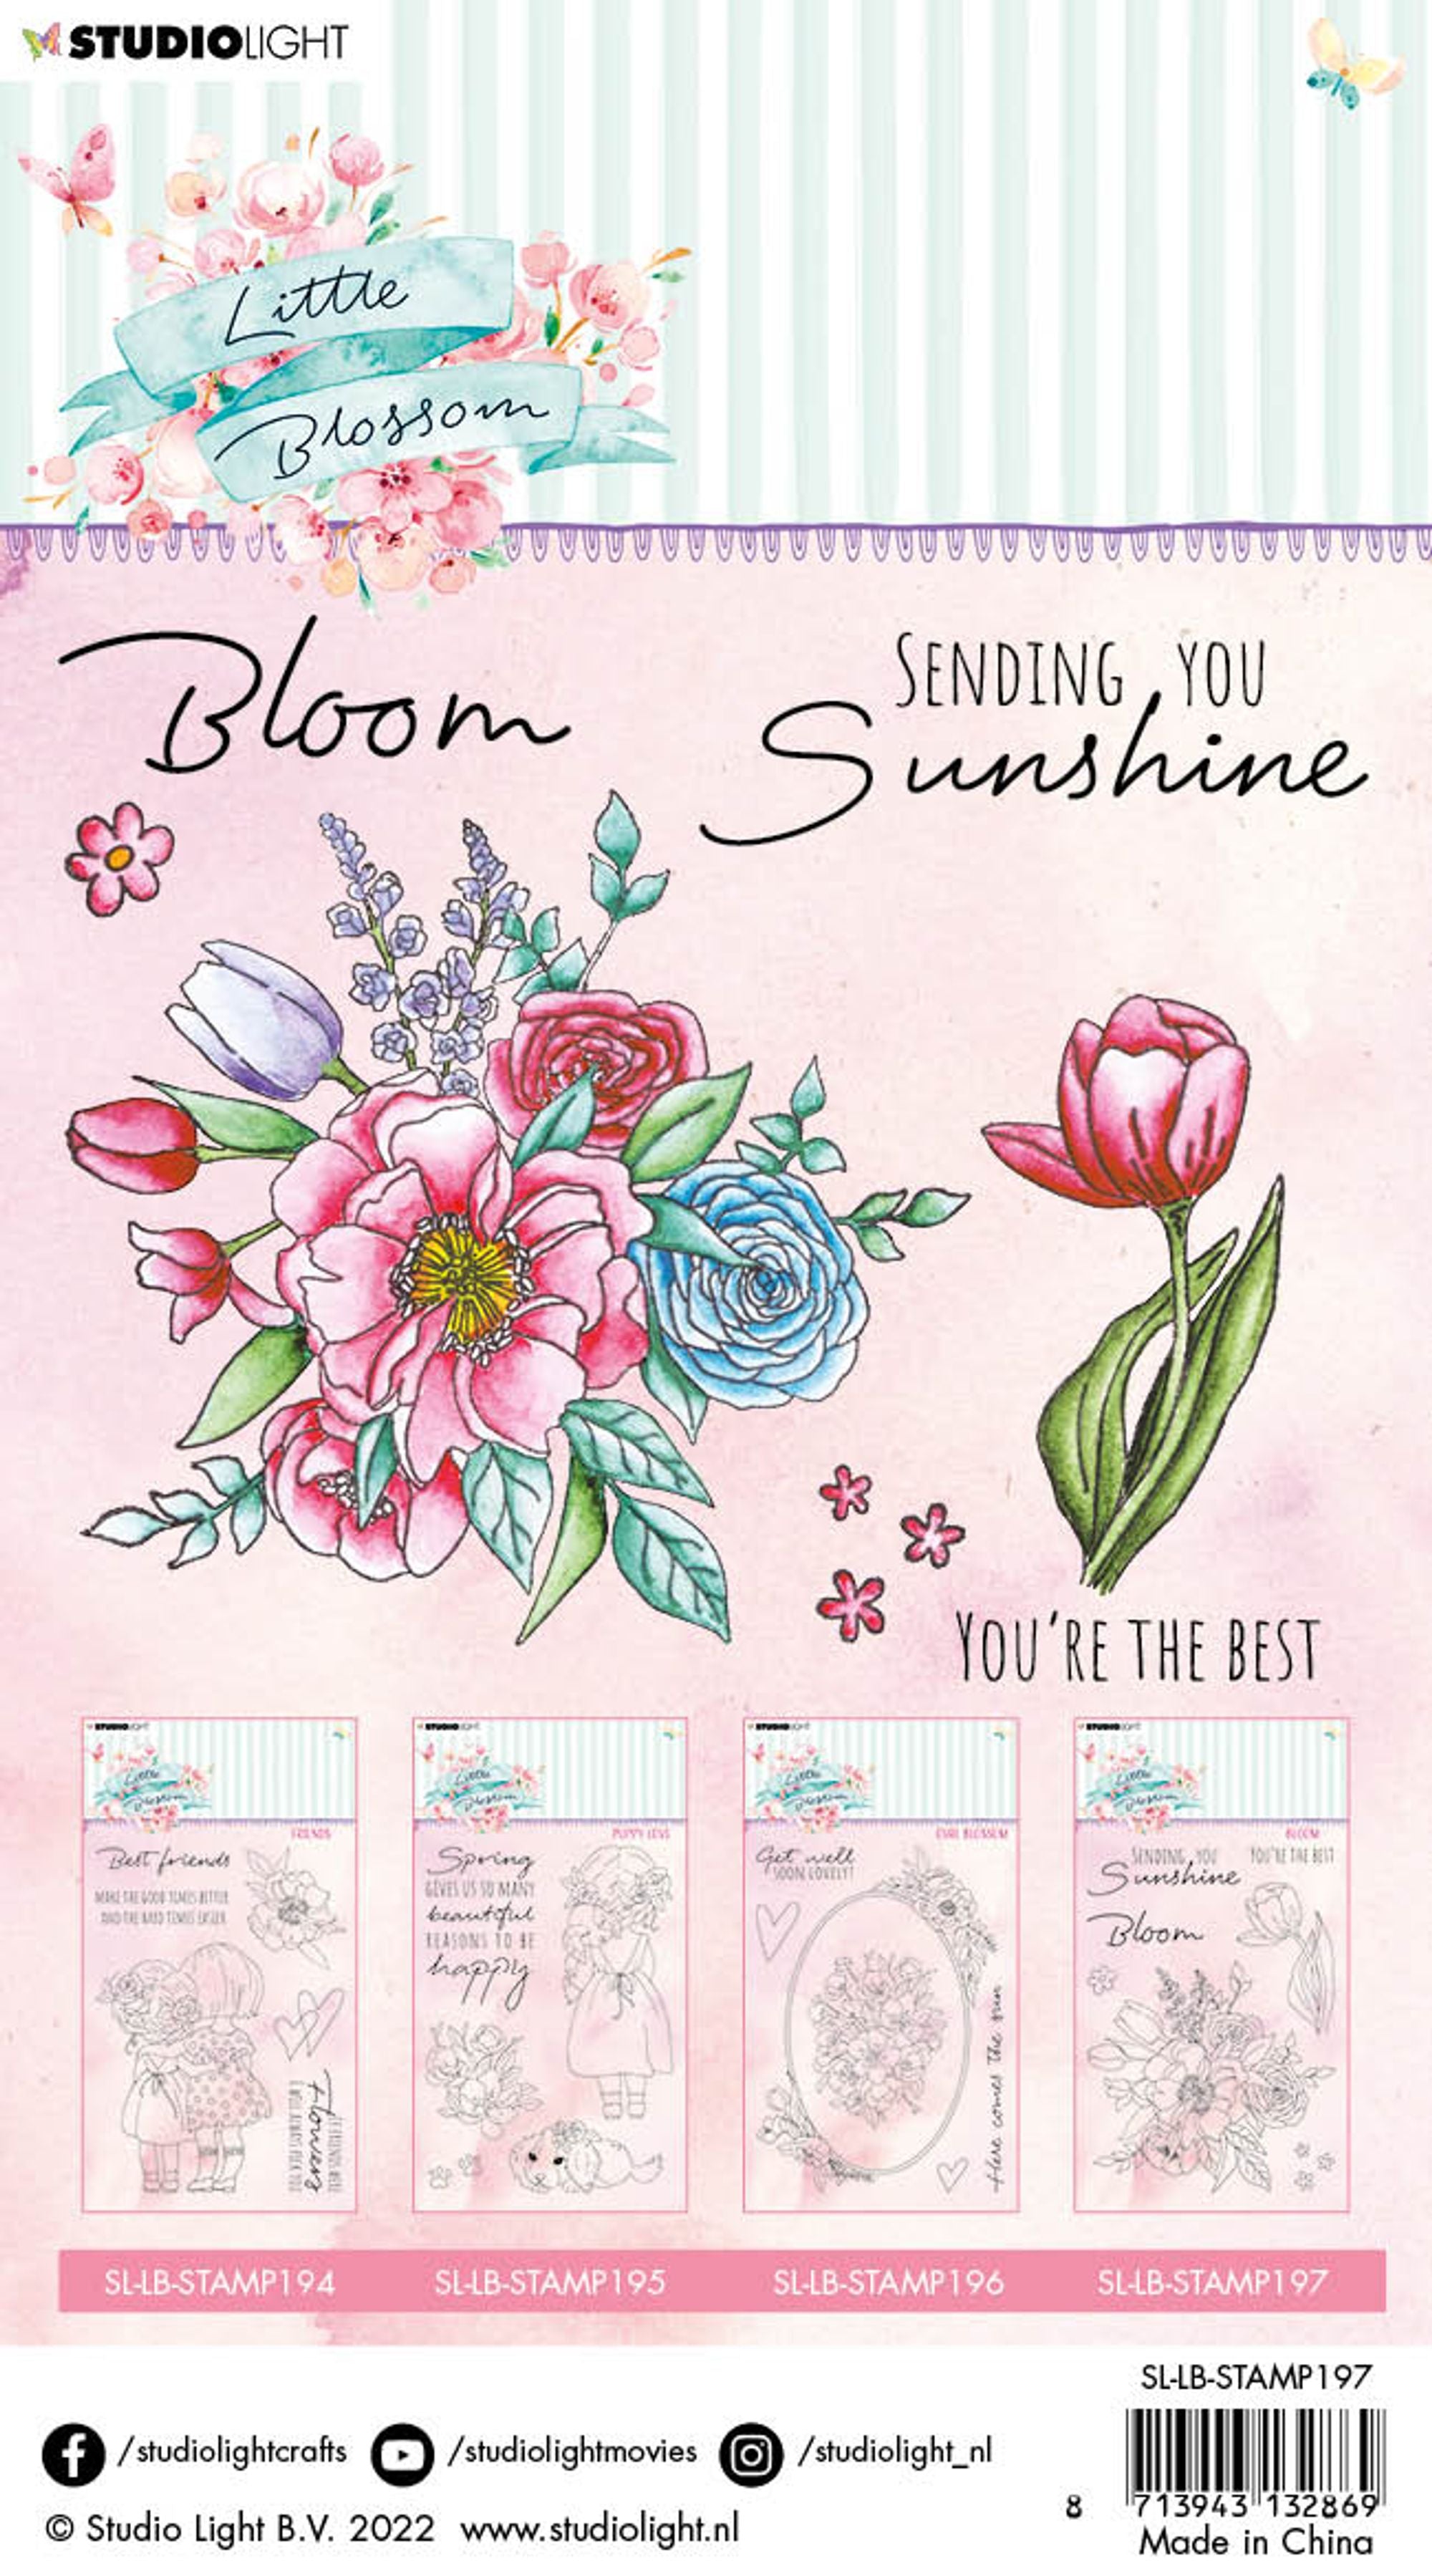 SL Clear Stamp Bloom Little Blossom 105x148x3mm 1 PC nr.197